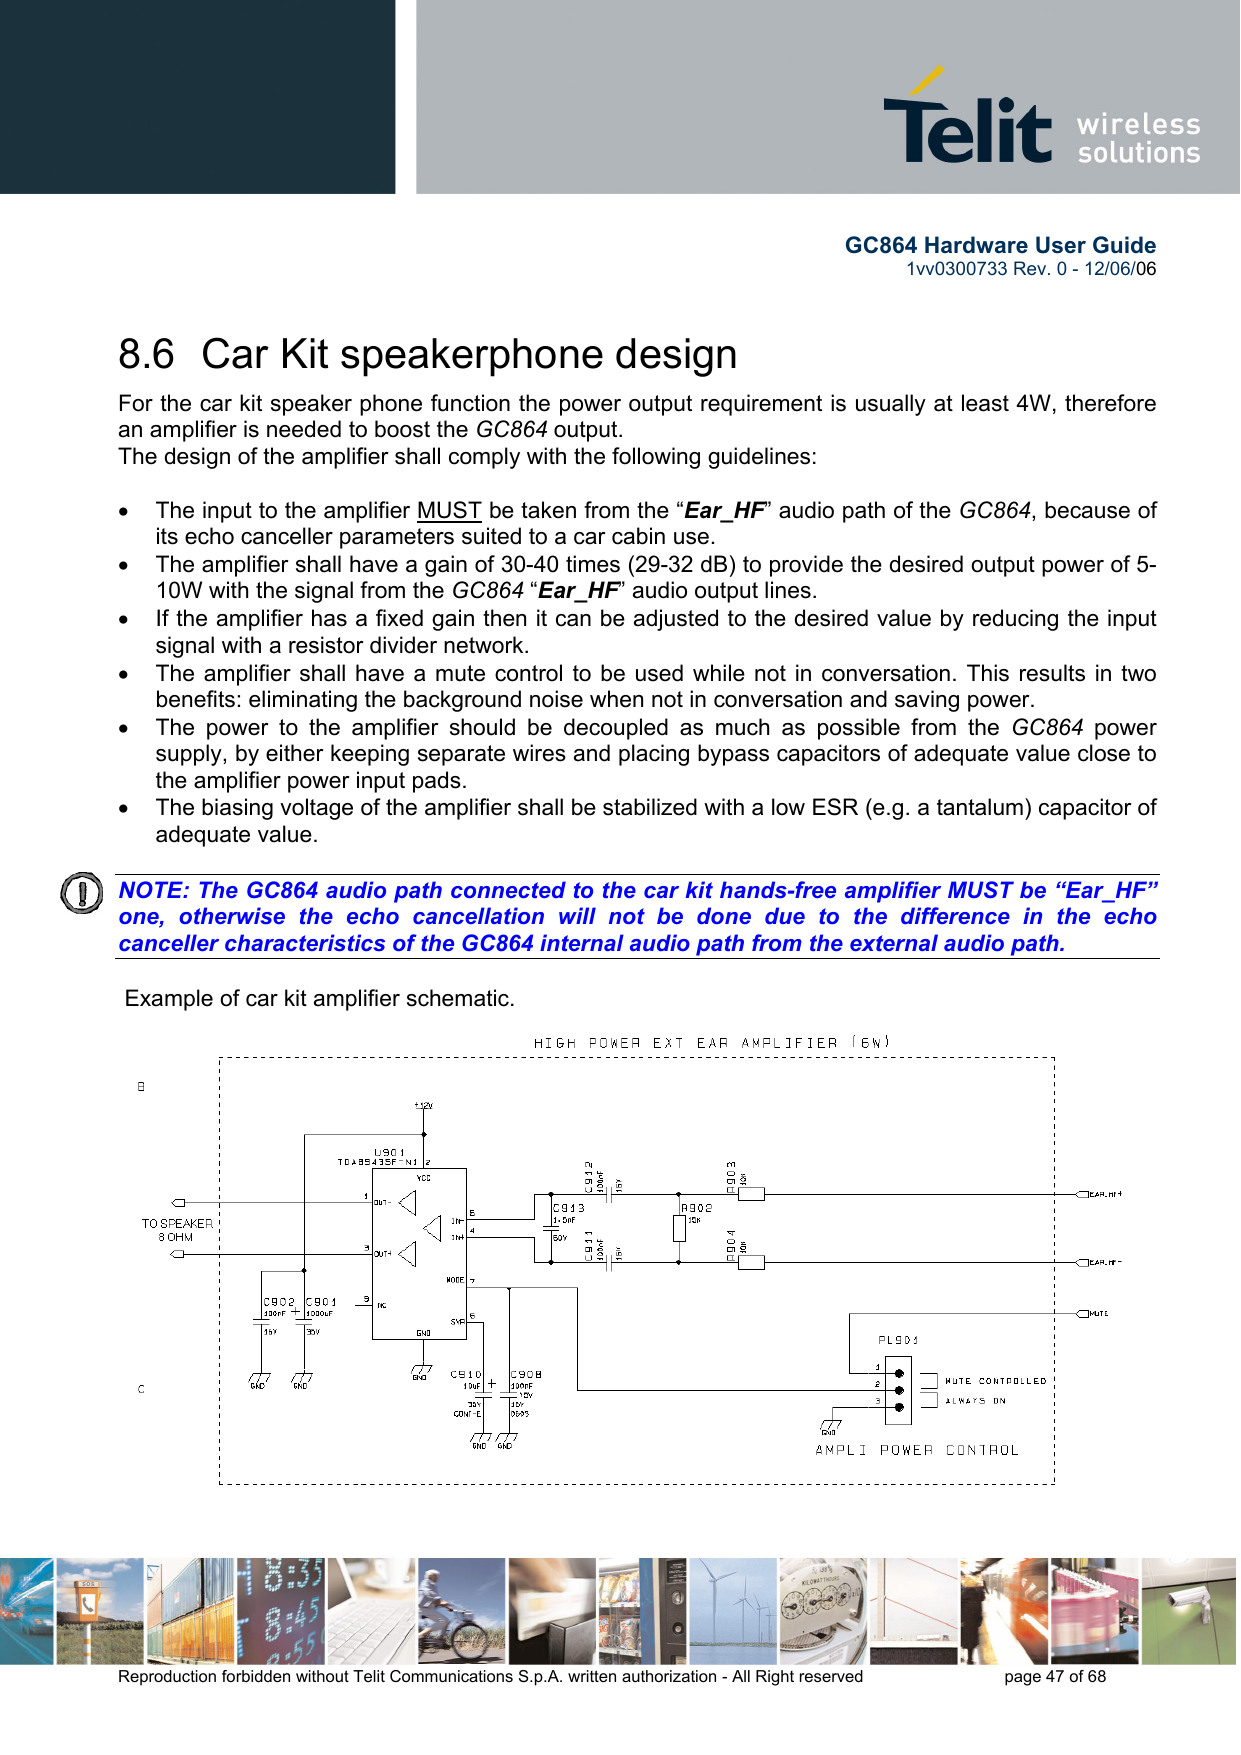        GC864 Hardware User Guide  1vv0300733 Rev. 0 - 12/06/06  Reproduction forbidden without Telit Communications S.p.A. written authorization - All Right reserved    page 47 of 68  8.6  Car Kit speakerphone design For the car kit speaker phone function the power output requirement is usually at least 4W, therefore an amplifier is needed to boost the GC864 output. The design of the amplifier shall comply with the following guidelines:  •  The input to the amplifier MUST be taken from the “Ear_HF” audio path of the GC864, because of its echo canceller parameters suited to a car cabin use. •  The amplifier shall have a gain of 30-40 times (29-32 dB) to provide the desired output power of 5-10W with the signal from the GC864 “Ear_HF” audio output lines. •  If the amplifier has a fixed gain then it can be adjusted to the desired value by reducing the input signal with a resistor divider network. •  The amplifier shall have a mute control to be used while not in conversation. This results in two benefits: eliminating the background noise when not in conversation and saving power. •  The power to the amplifier should be decoupled as much as possible from the GC864 power supply, by either keeping separate wires and placing bypass capacitors of adequate value close to the amplifier power input pads. •  The biasing voltage of the amplifier shall be stabilized with a low ESR (e.g. a tantalum) capacitor of adequate value.   NOTE: The GC864 audio path connected to the car kit hands-free amplifier MUST be “Ear_HF” one, otherwise the echo cancellation will not be done due to the difference in the echo canceller characteristics of the GC864 internal audio path from the external audio path.     Example of car kit amplifier schematic.  